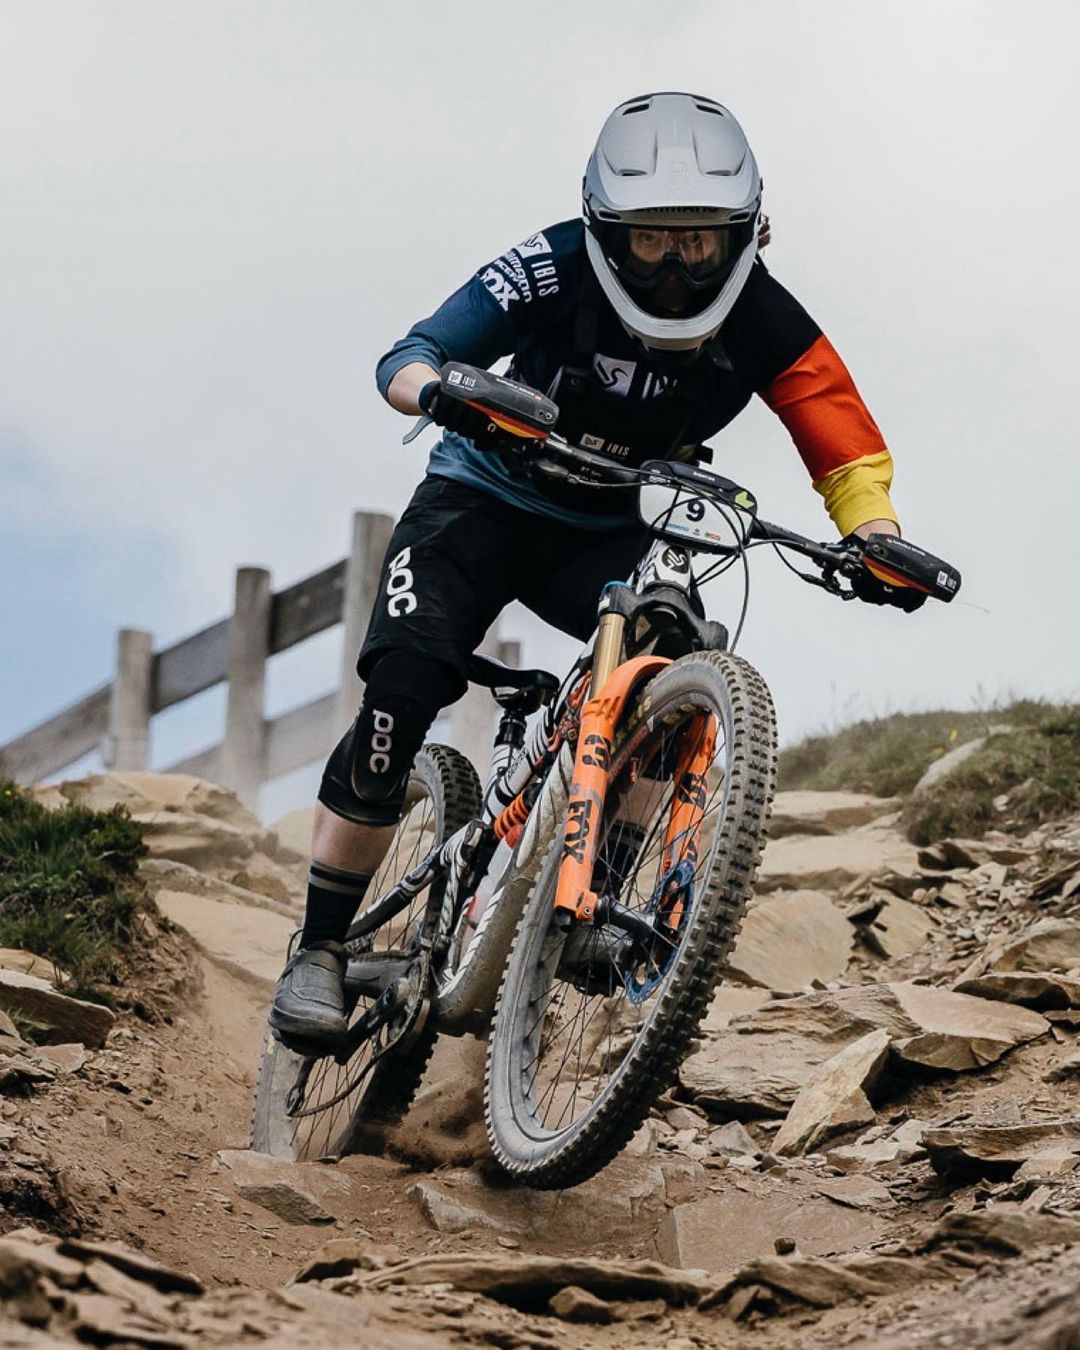 The new Ibis HD6 being raced in the 2023 Enduro World Cup. Photo by Niklas Wallner.